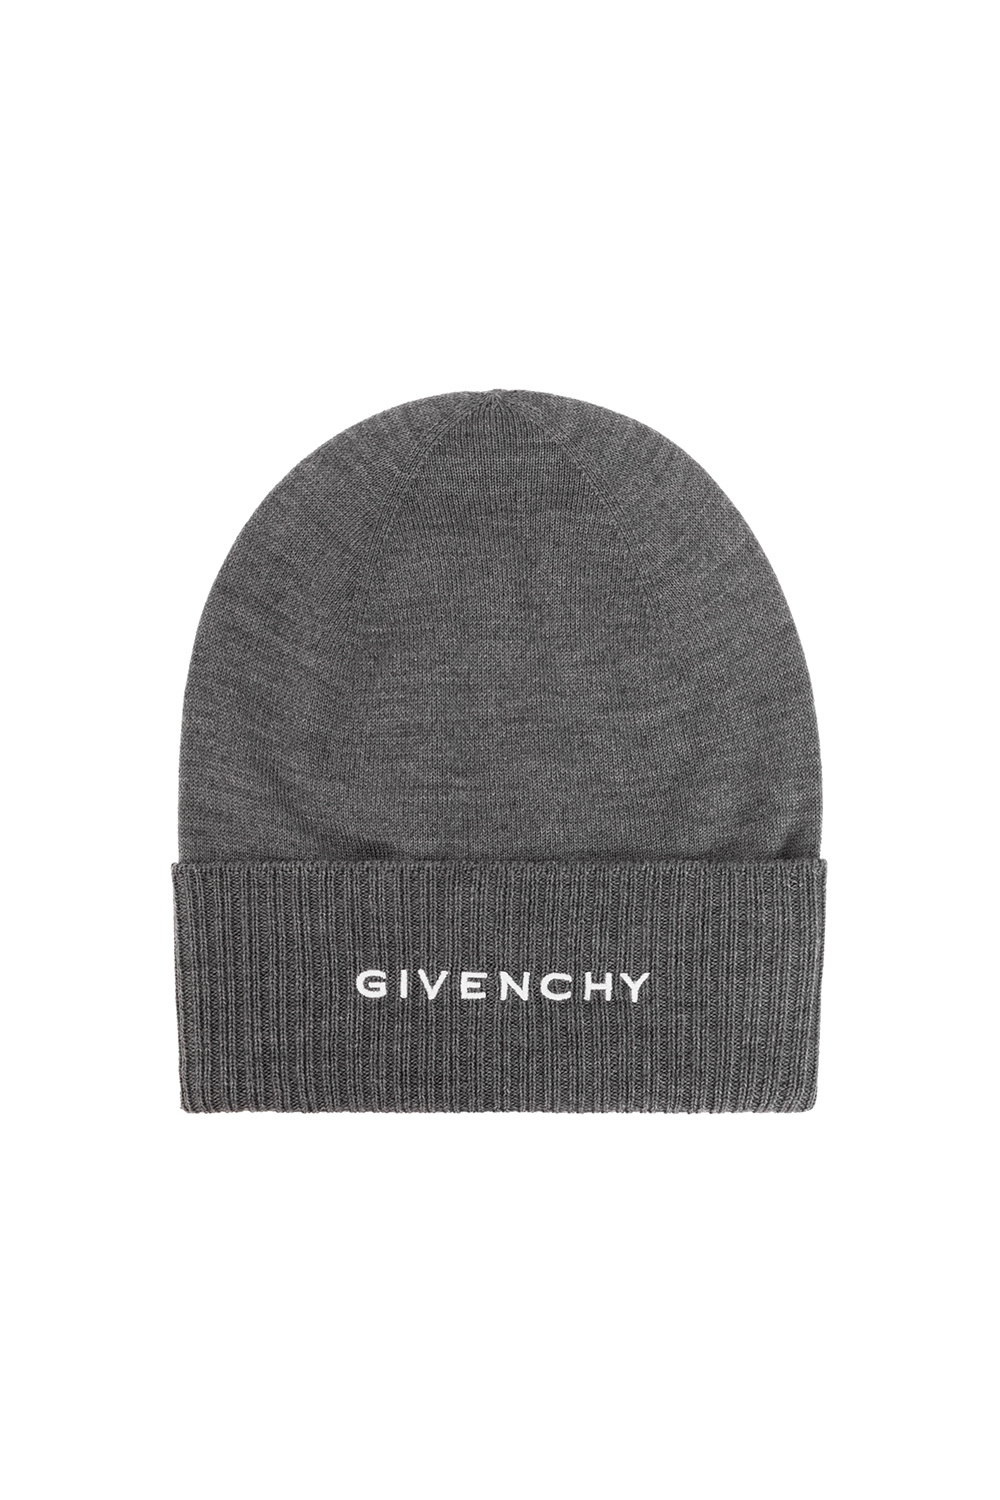 givenchy zipped Beanie with logo